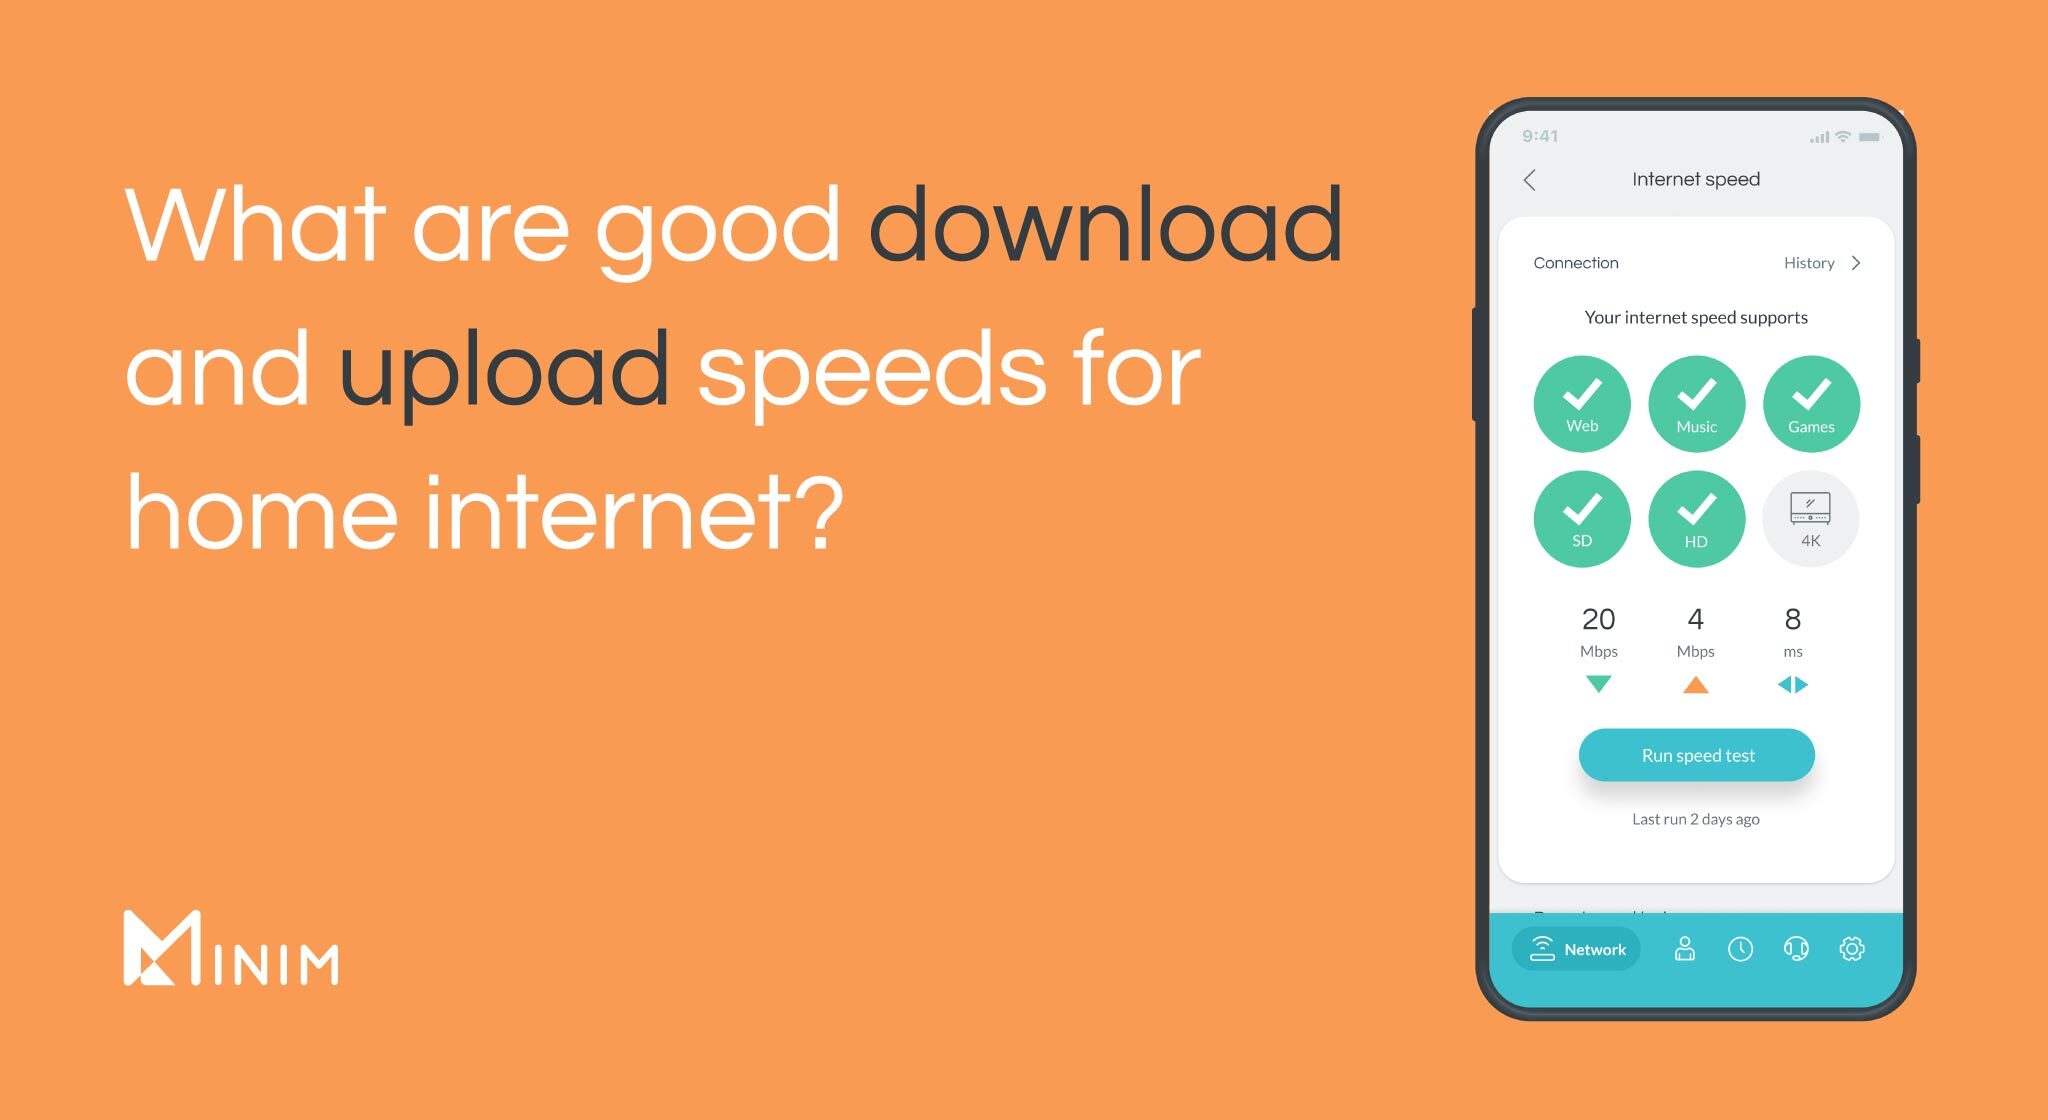 What are good download and upload speeds for home internet?